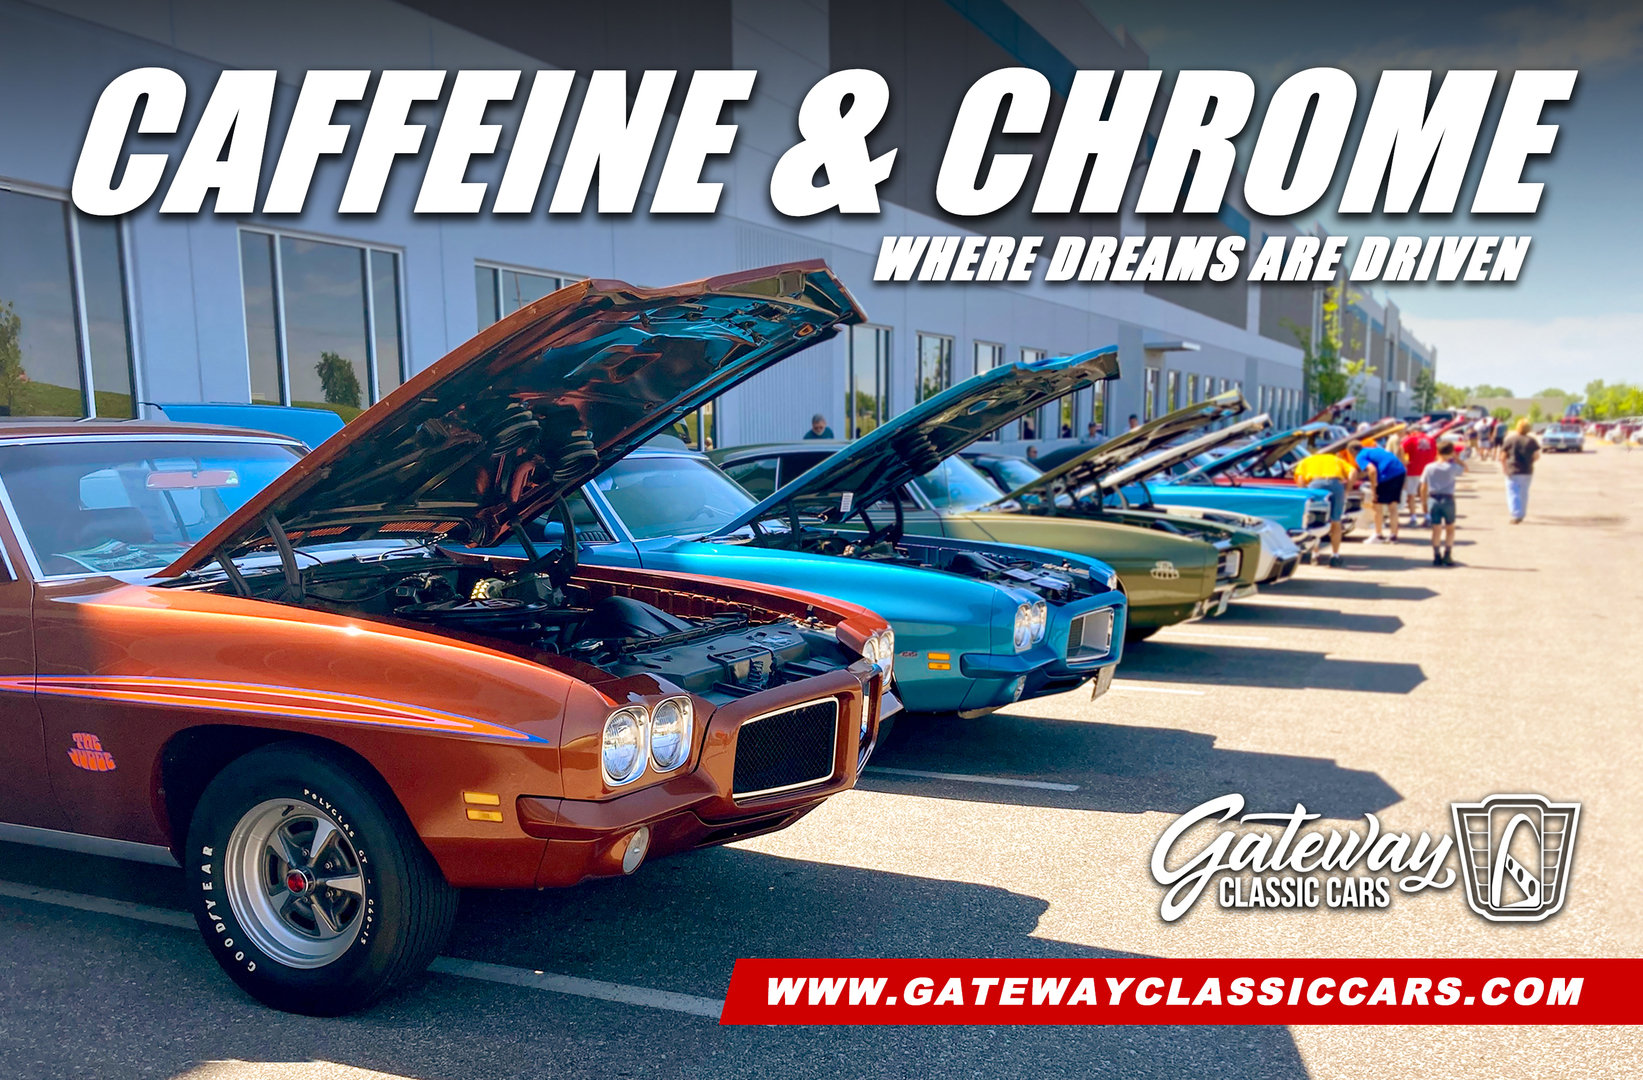 Caffeine and Chrome - Classic Cars and Coffee at Gateway Classic Cars of Las Vegas, Las Vegas, Nevada, United States